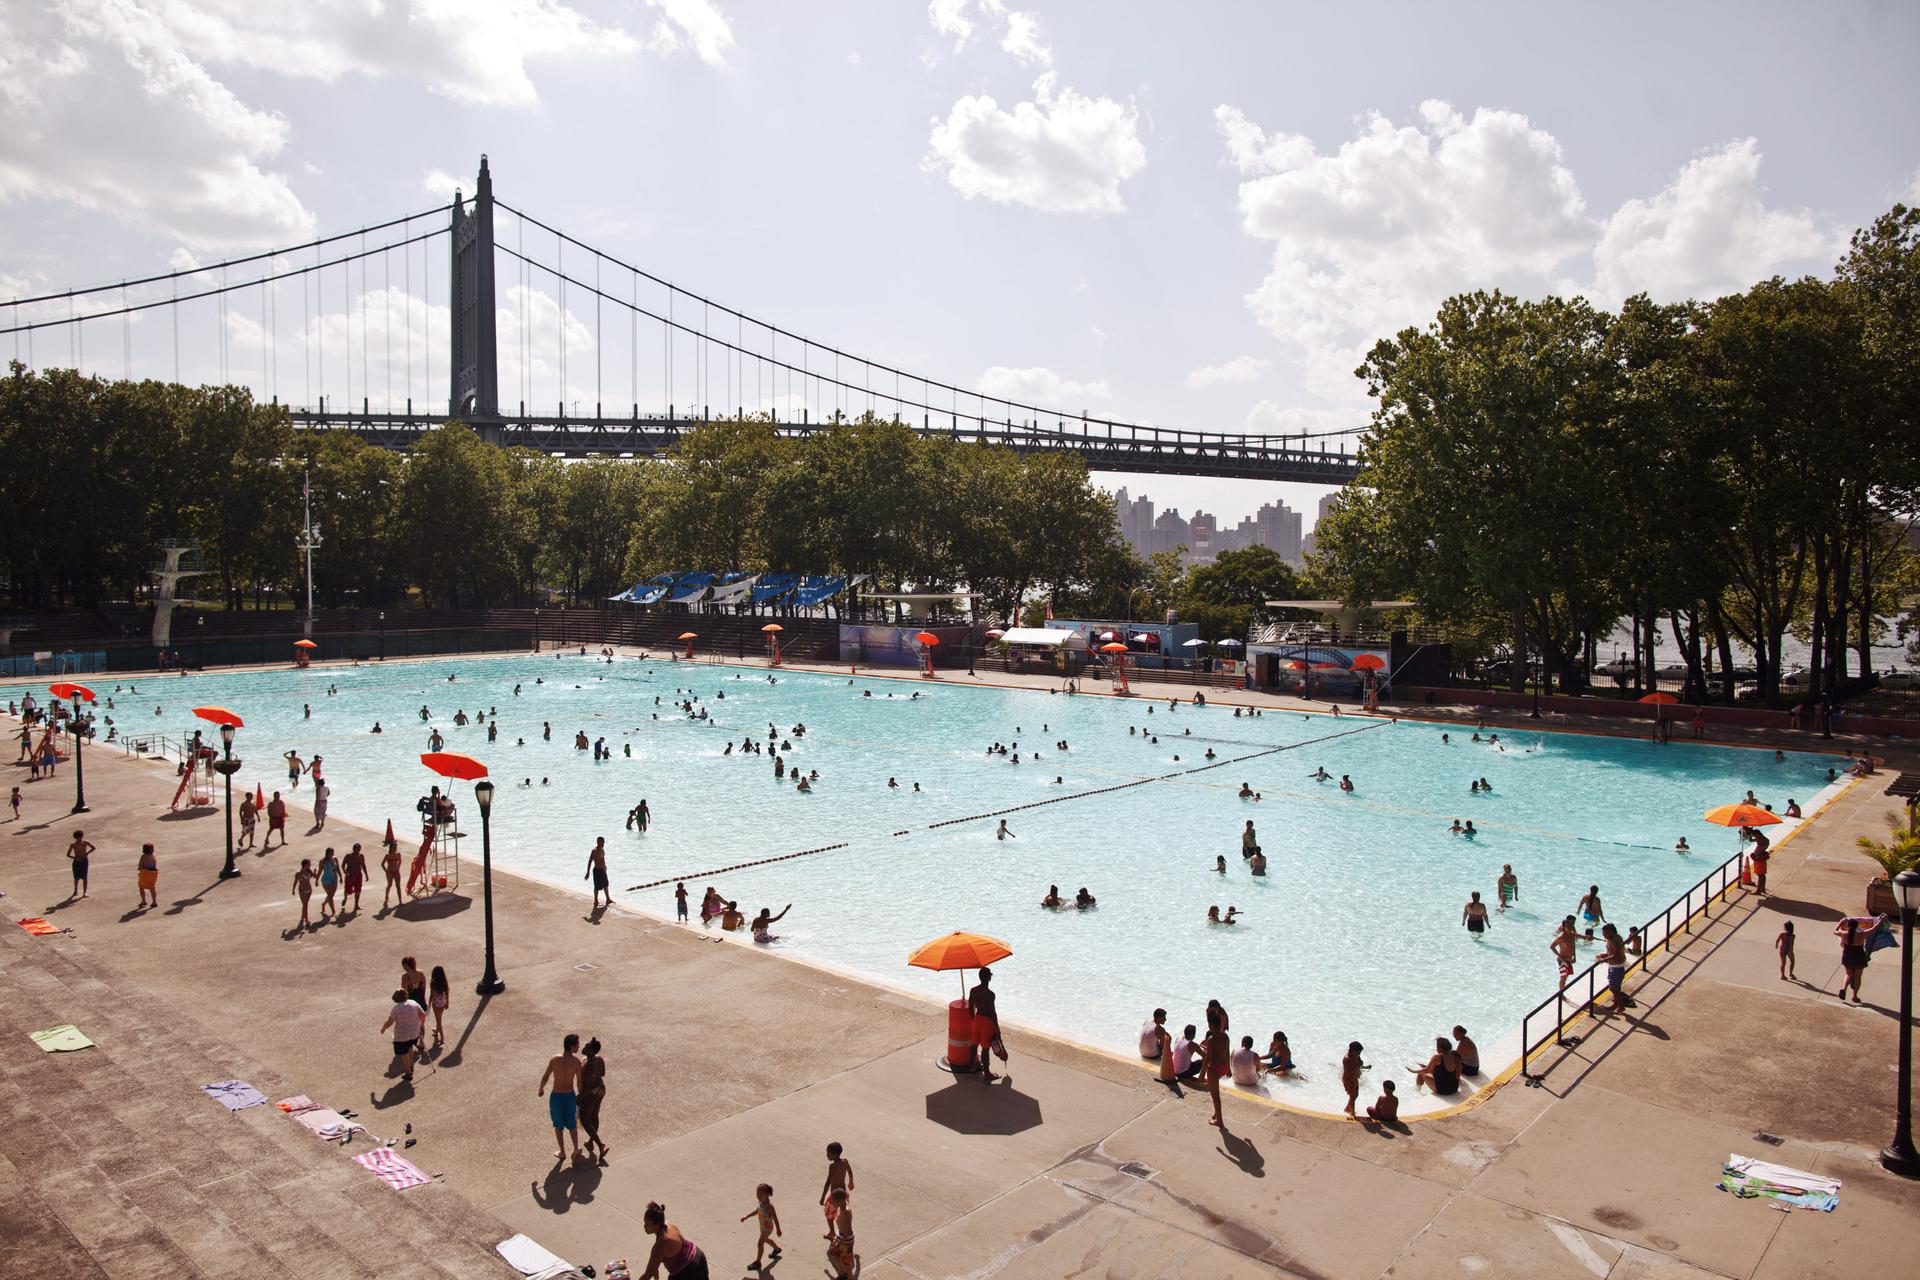 Taking a break from the heat at Astoria Park pool 